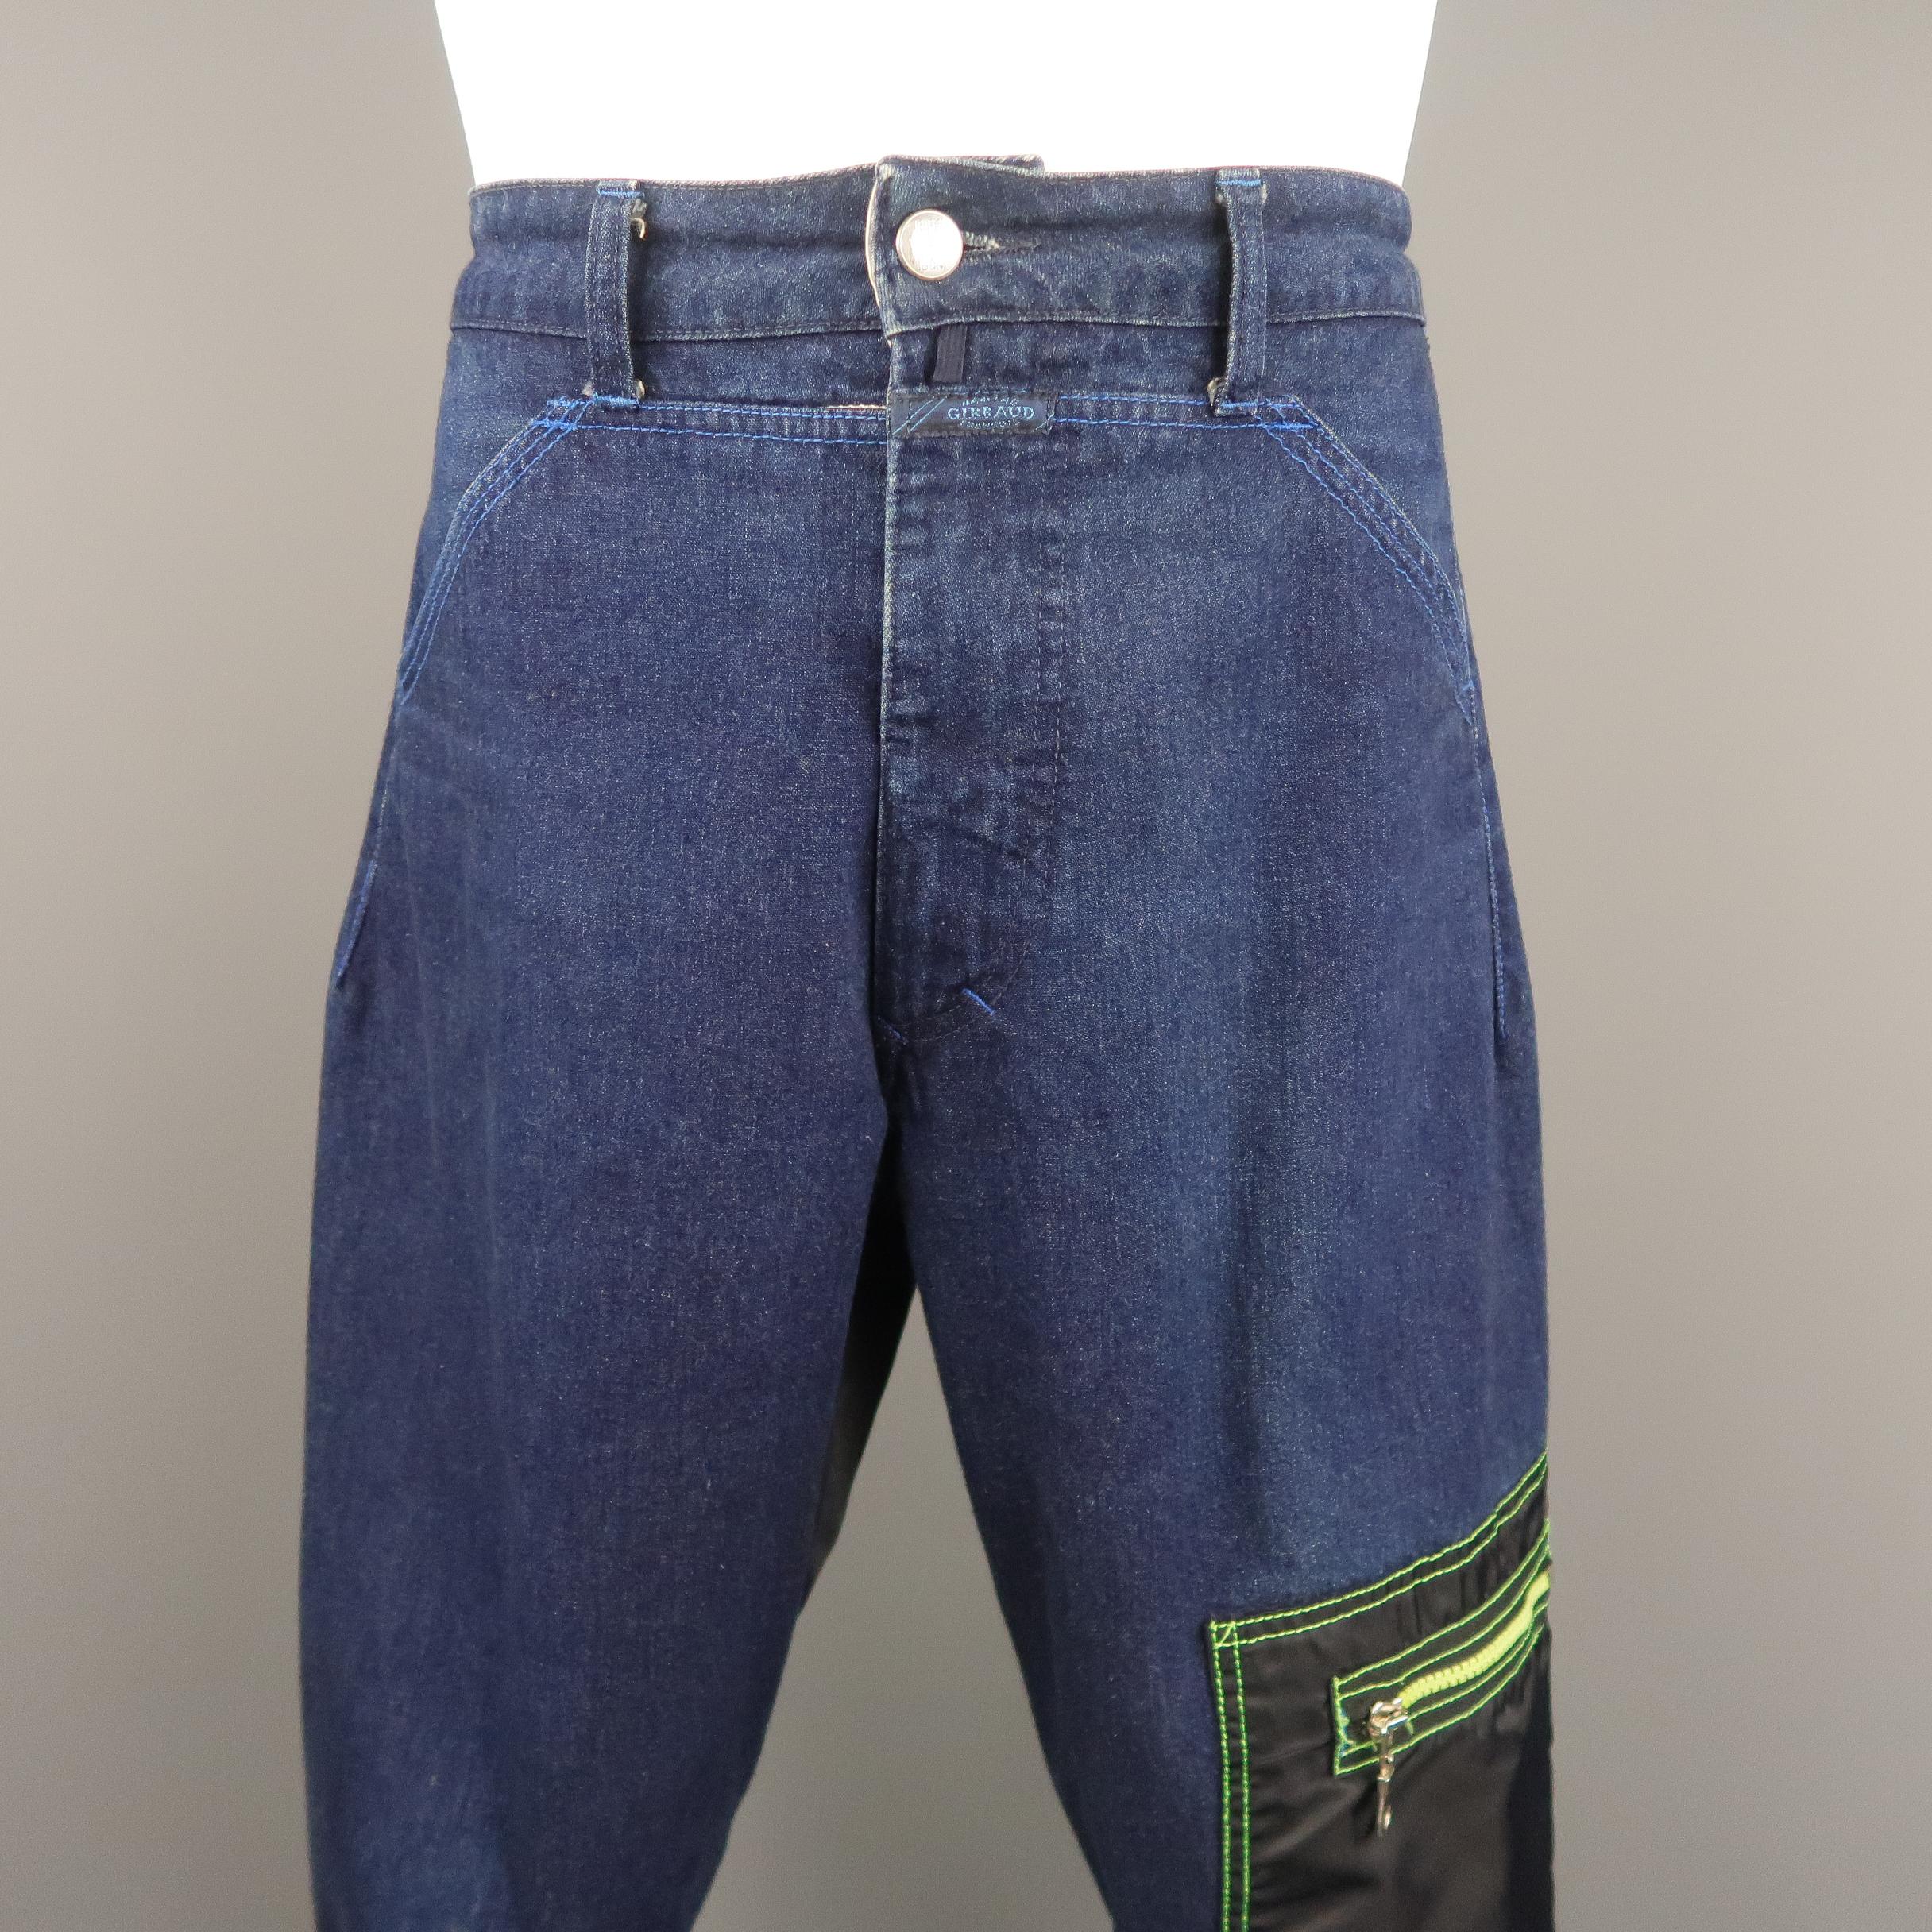 Vintage 1990's MARITHE+FRANCOIS GIRBAUD jeans come in classic indigo blue denim with a black nylon patch zip pocket, neon green stitch details, zip cuffs, and nylon back panel. Minor wear on back panel. As-is. Made in Italy.
 
Good Pre-Owned